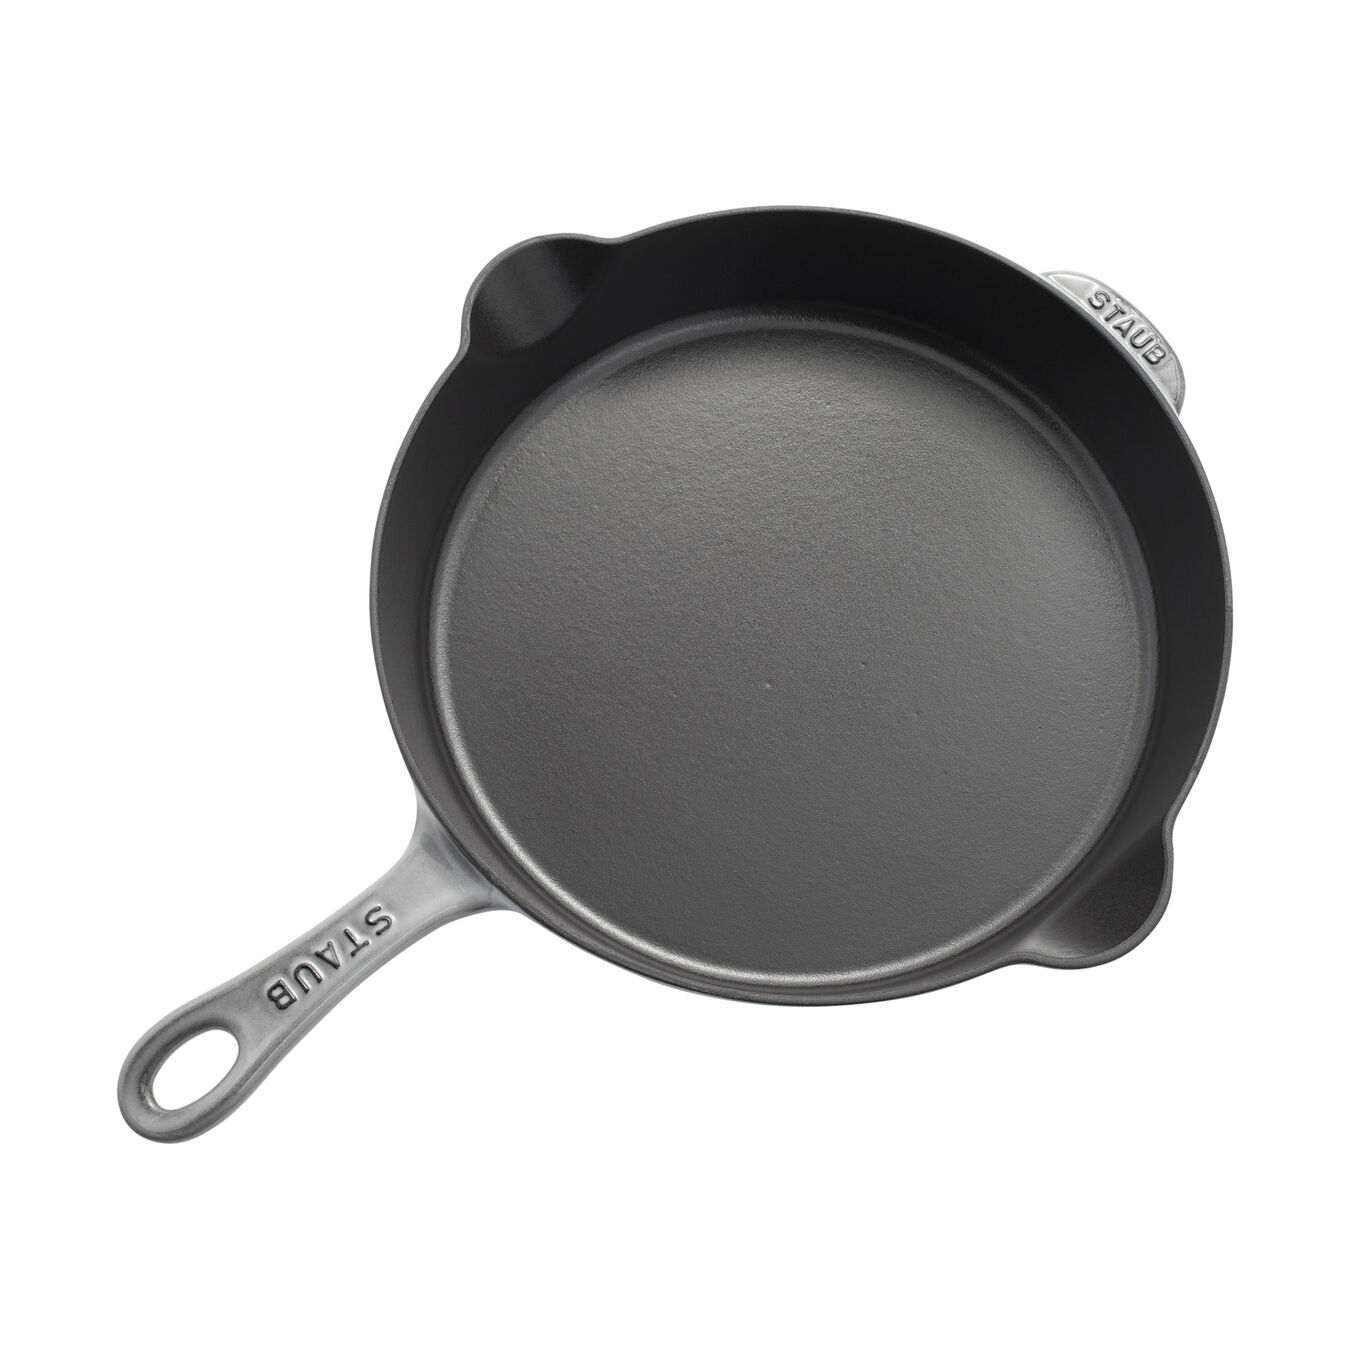 11-inch, Traditional Deep Skillet, graphite grey,,large 2